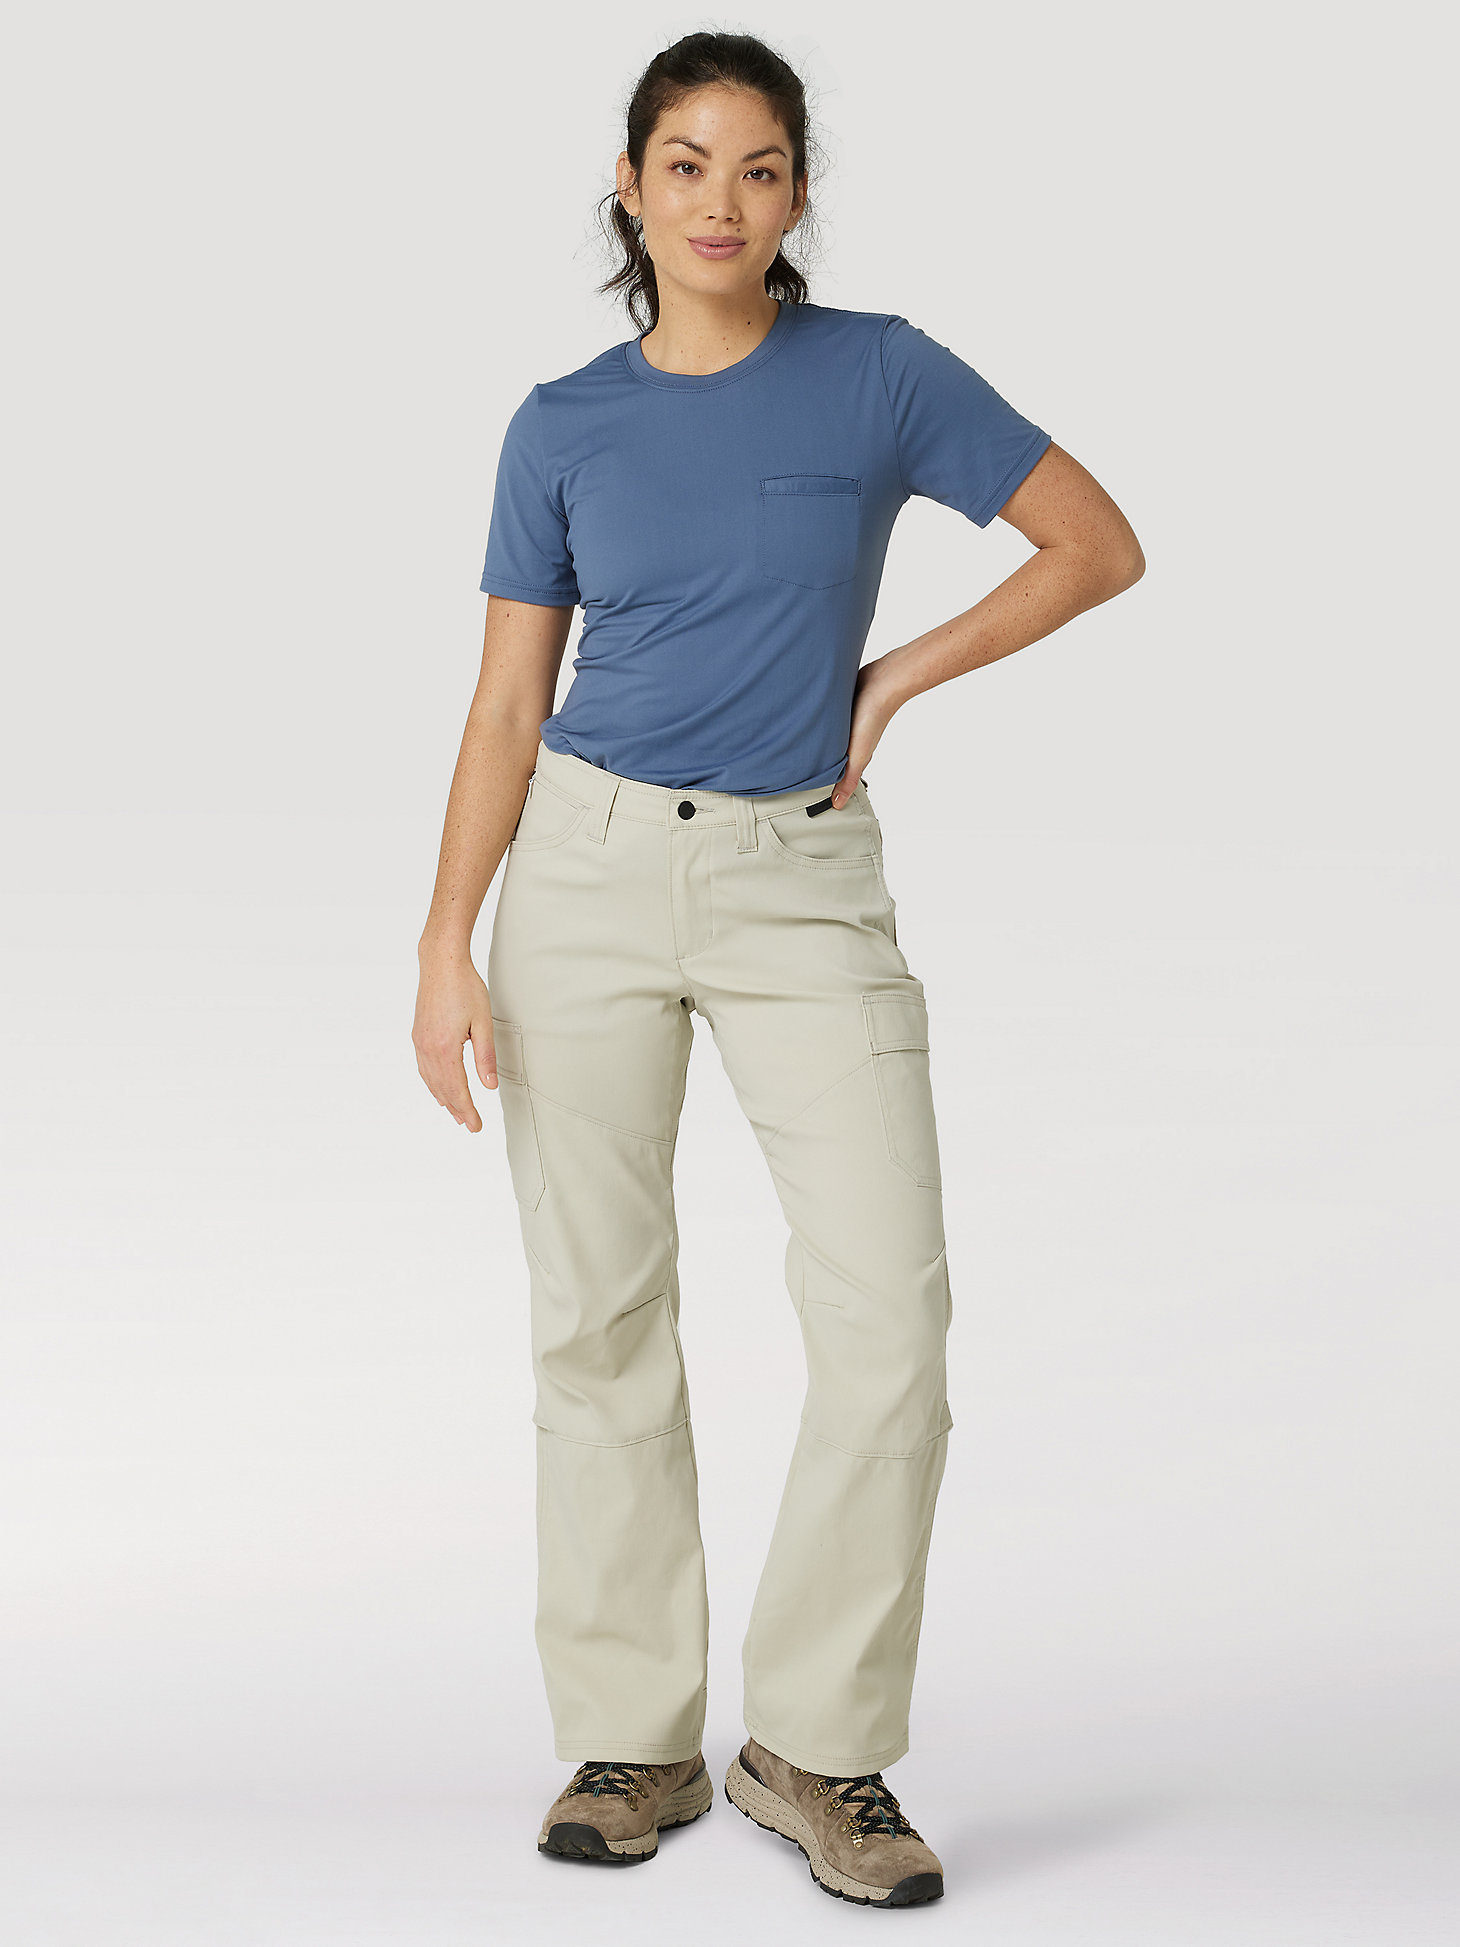 Cargo Bootcut Trousers in Pelican alternative view 1